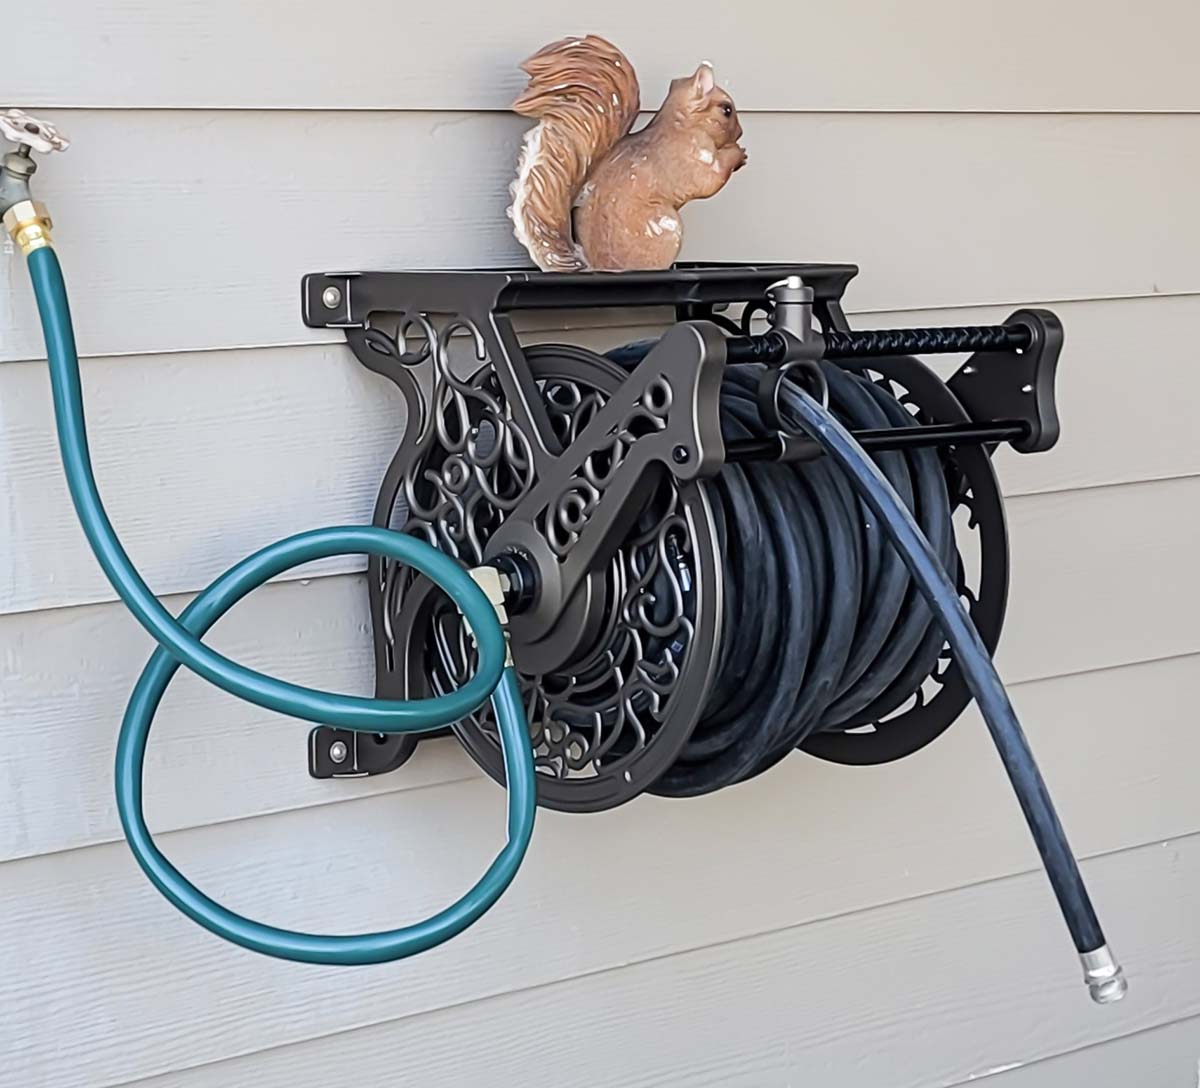 Have a question about Hampton Bay Wall-Mounted Hose Reel? - Pg 5